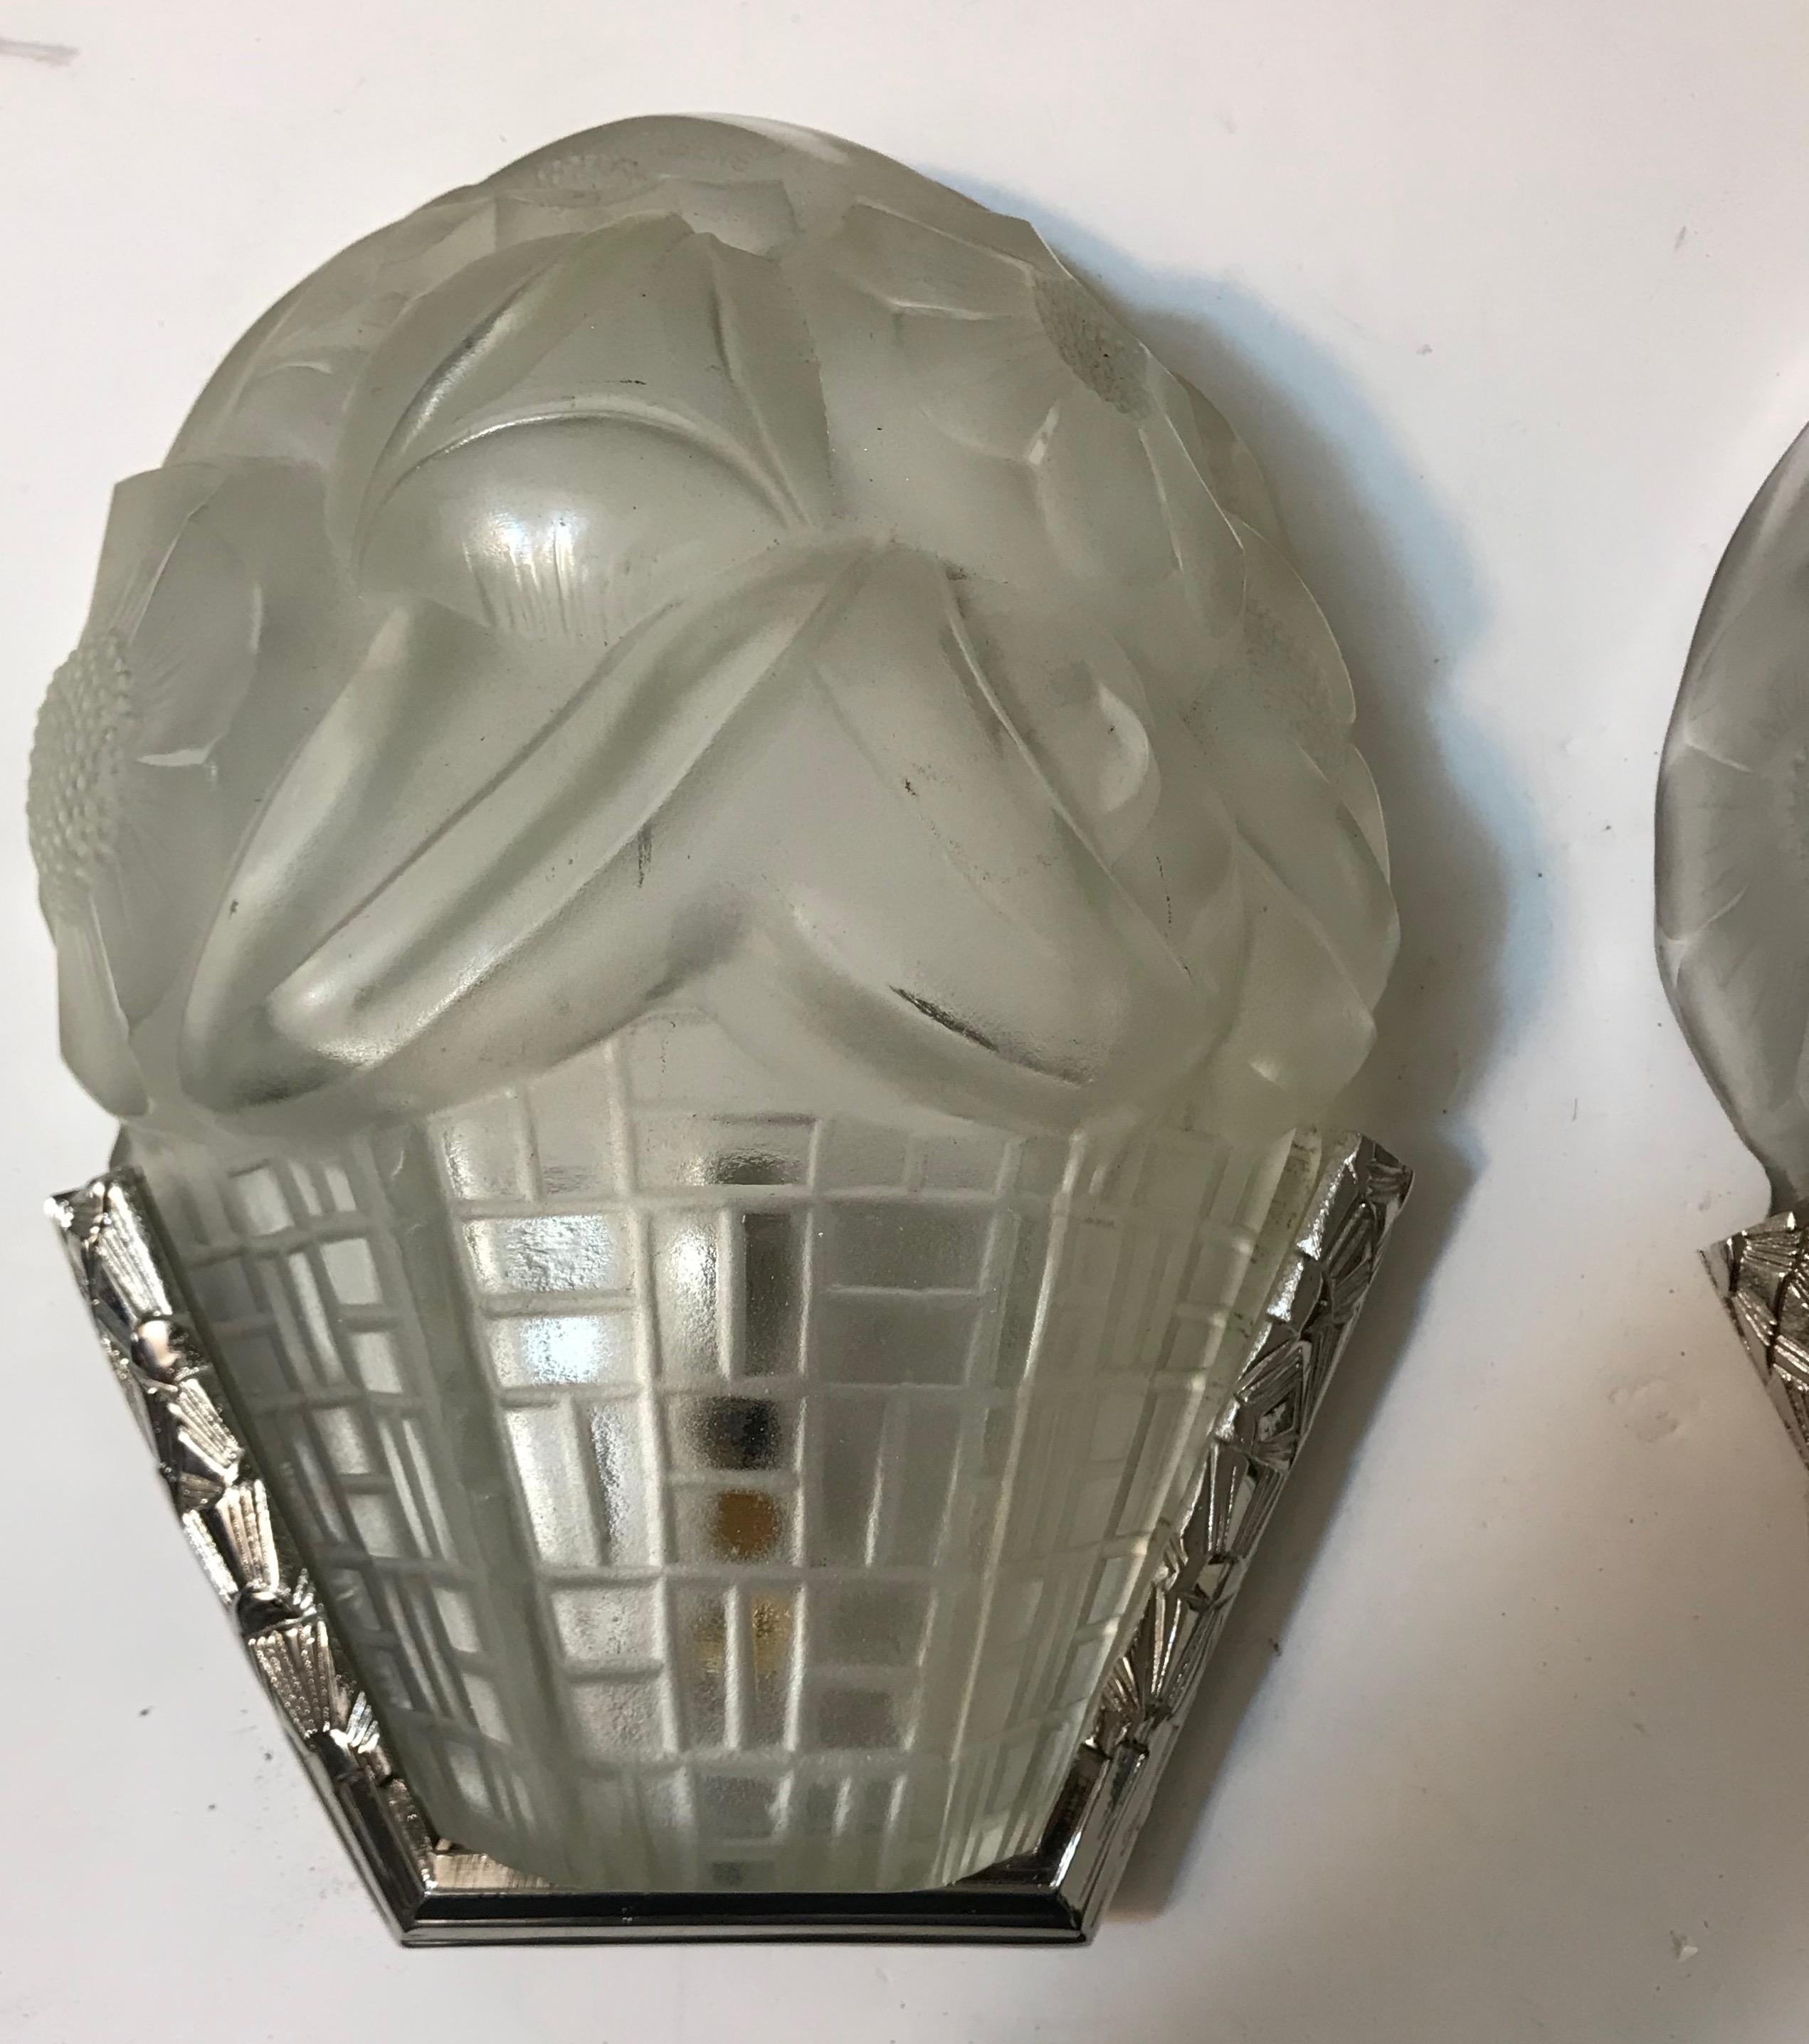 Pair of French Art Deco wall sconces signed by the French artist “Degue” in clear frosted glass shades with floral motif. Held by Polished nickel design frames. Has been rewired for American use with one candelabra socket. Each socket has max watt